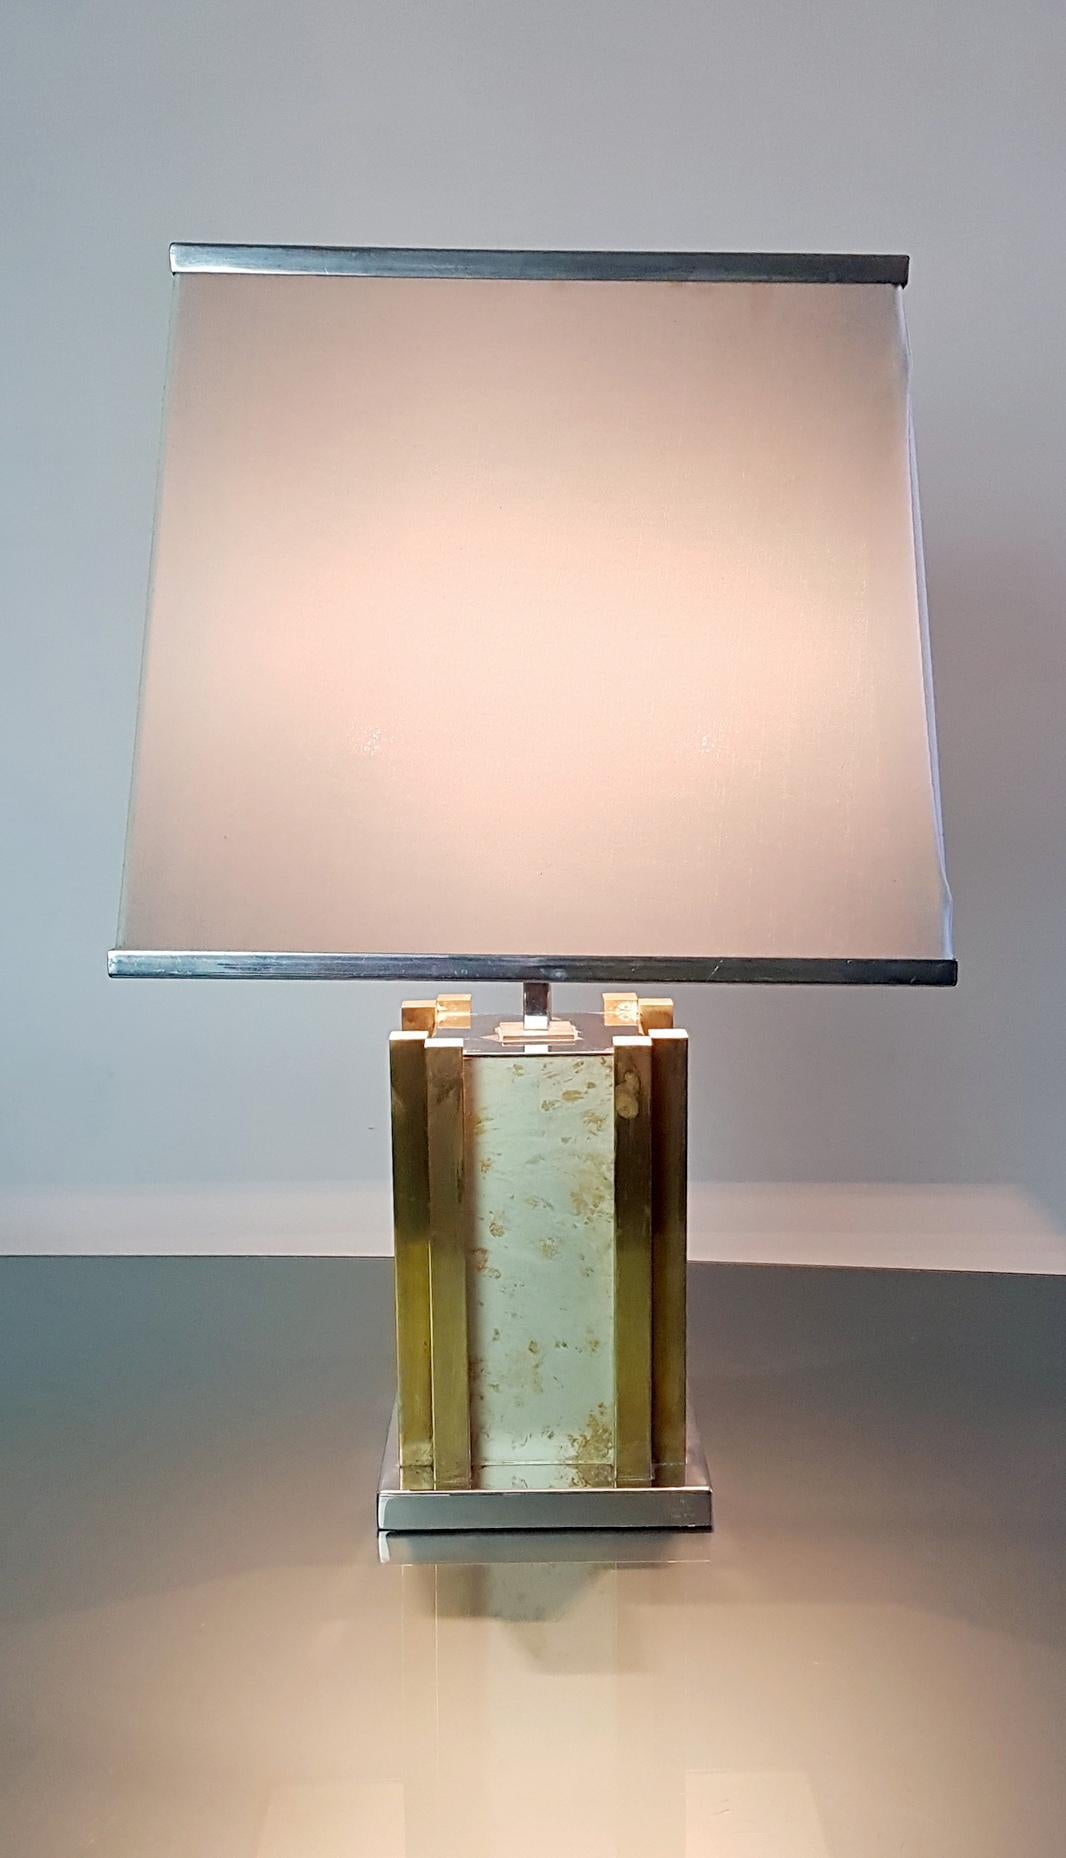 A signed table lamp by Romeo Rega with a chrome and brass base and faux stone sides. Original lampshade in white fabric and chrome. Uses two E27 lightbulbs and is in very nice condition.

Romeo Rega was an Italian designer who made a significant